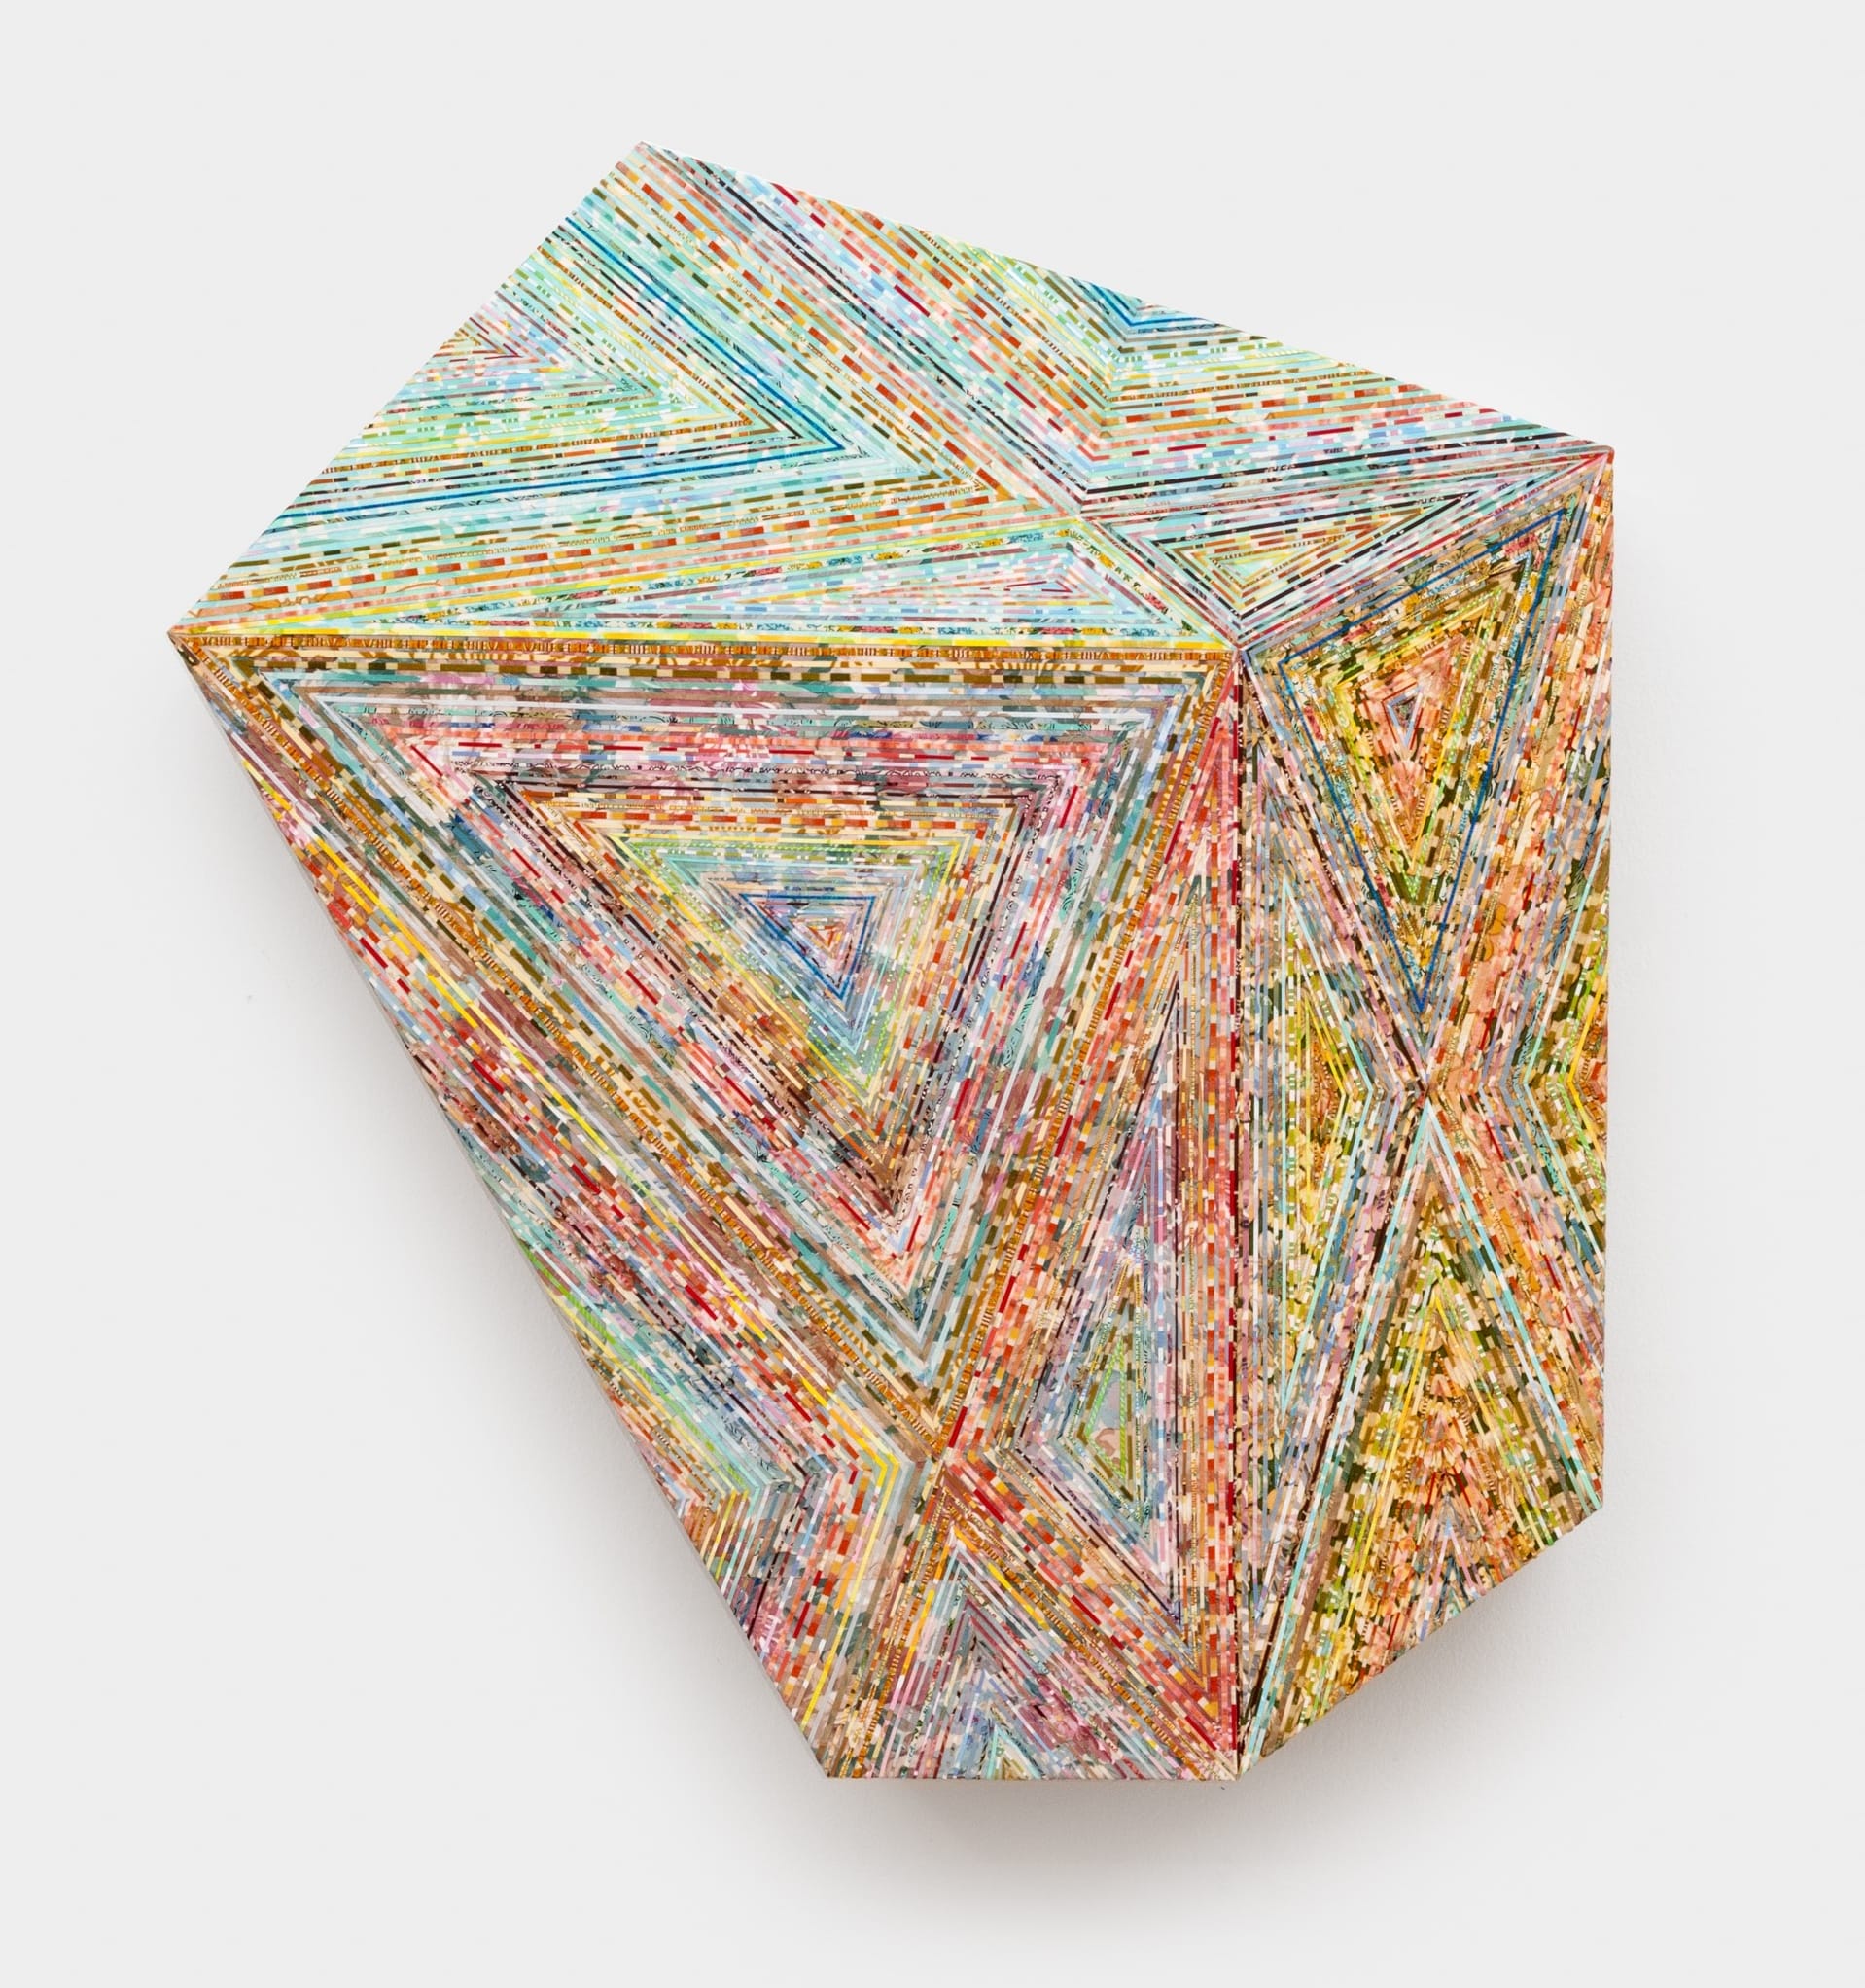 a geometric wall artwork with a deep, shaped panel overlaid with strips of colorful vintage wallpaper in a faceted pattern that plays with perspective and depth